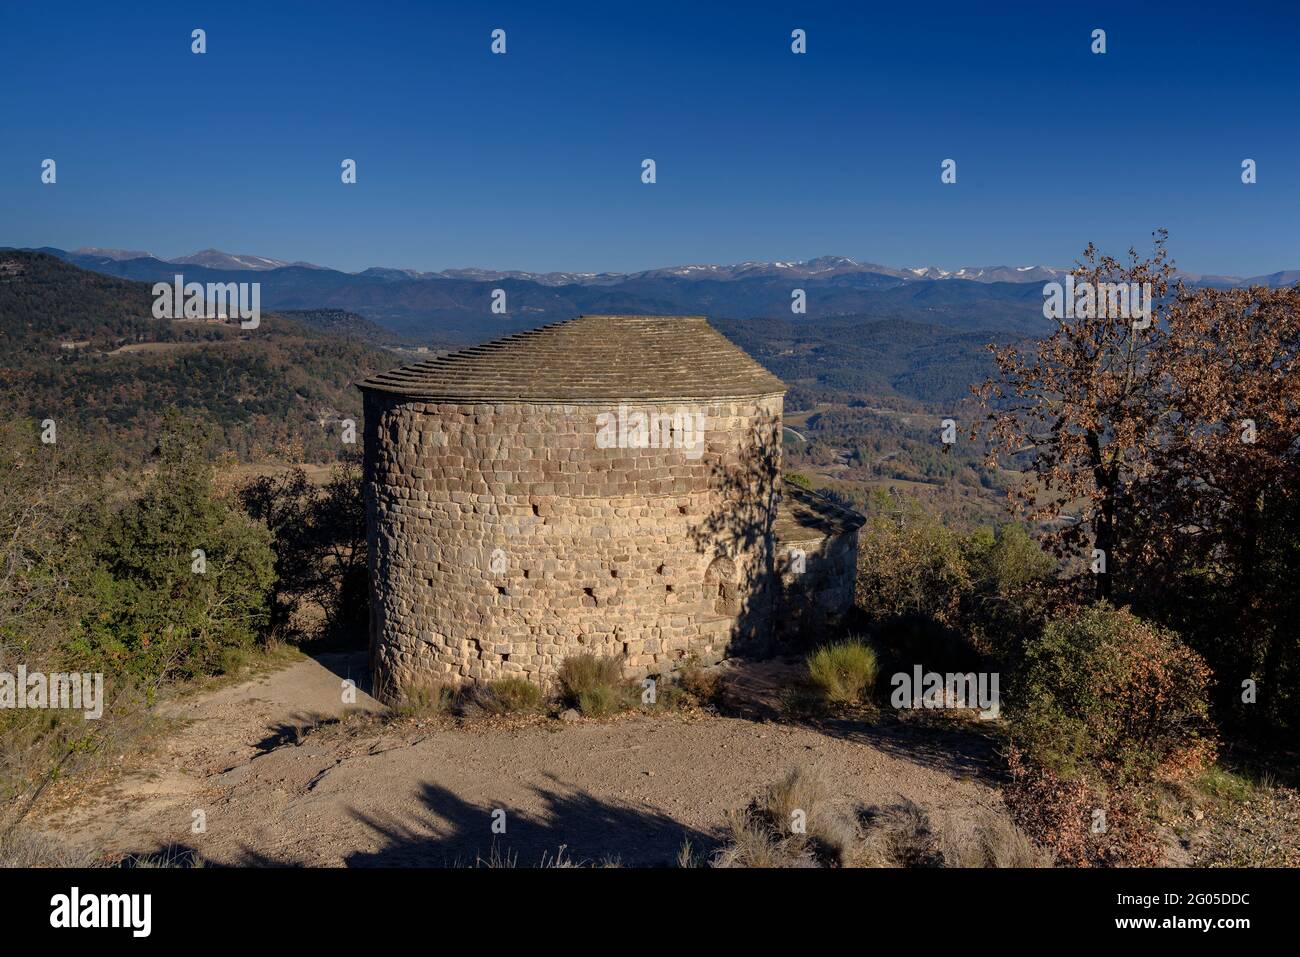 Views from the hill of the Lluçà castle with the Sant Vicenç de Lluçà hermitage in the foreground (Osona, Barcelona, Catalonia, Spain) Stock Photo